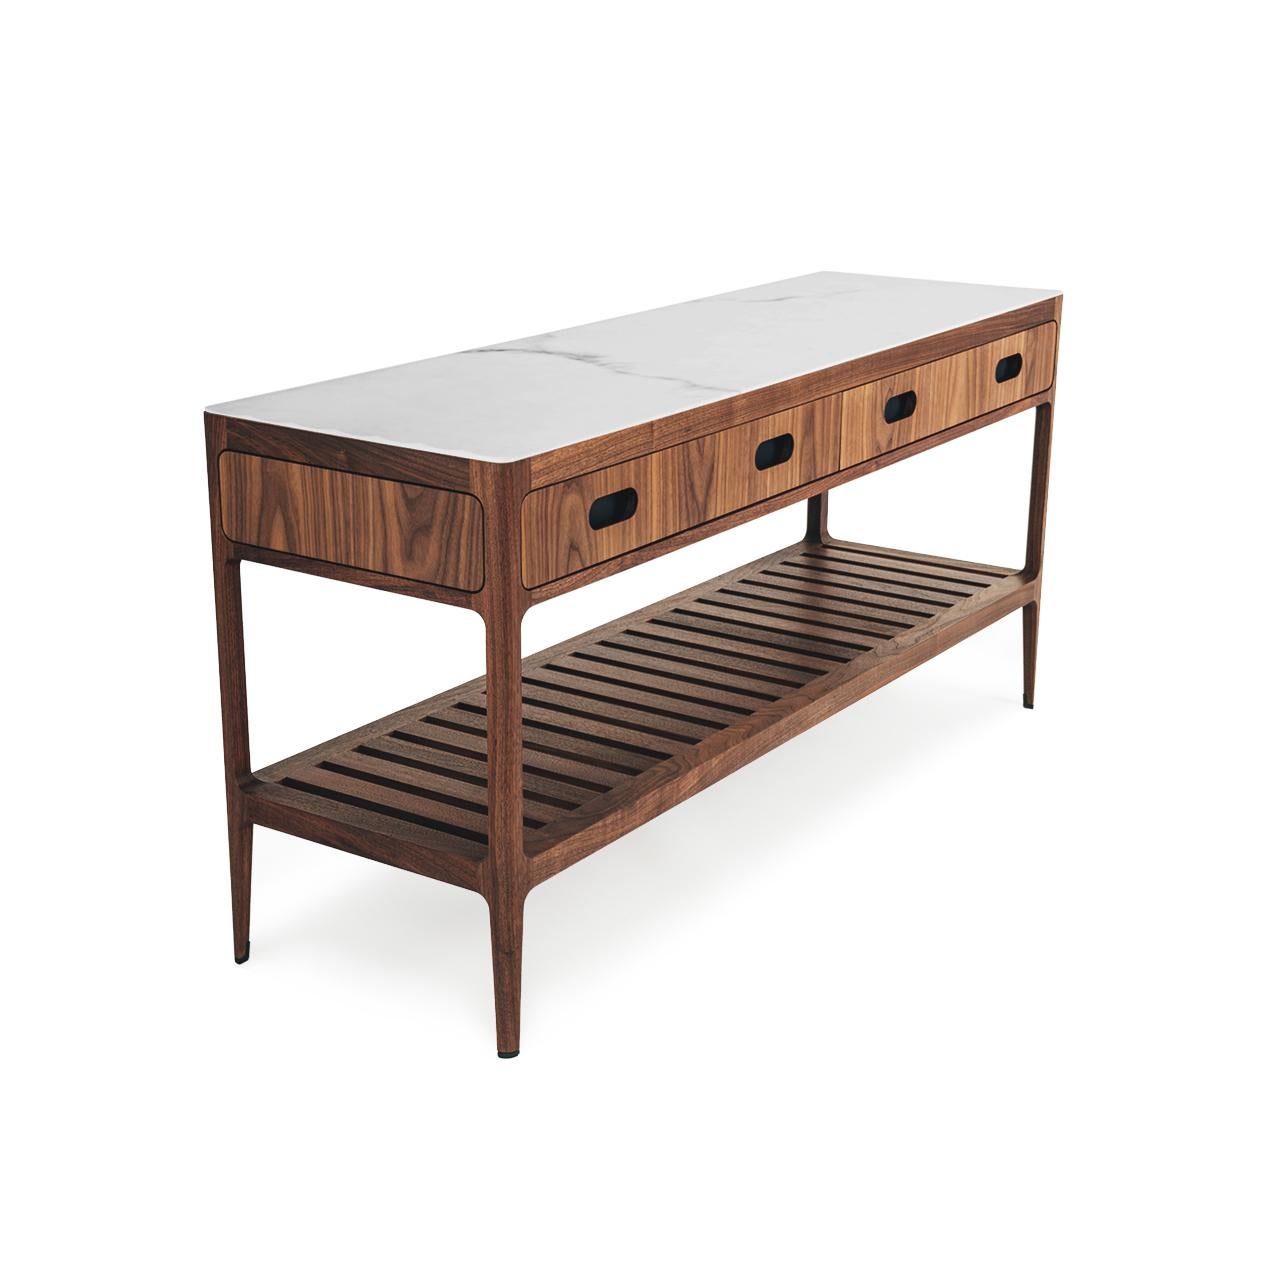 This modern walnut console table designed and fabricated by Munson Furniture draws inspiration from midcentury designs and fits beautifully with both traditional and contemporary interiors. See photos for just a few of the many customizable options.